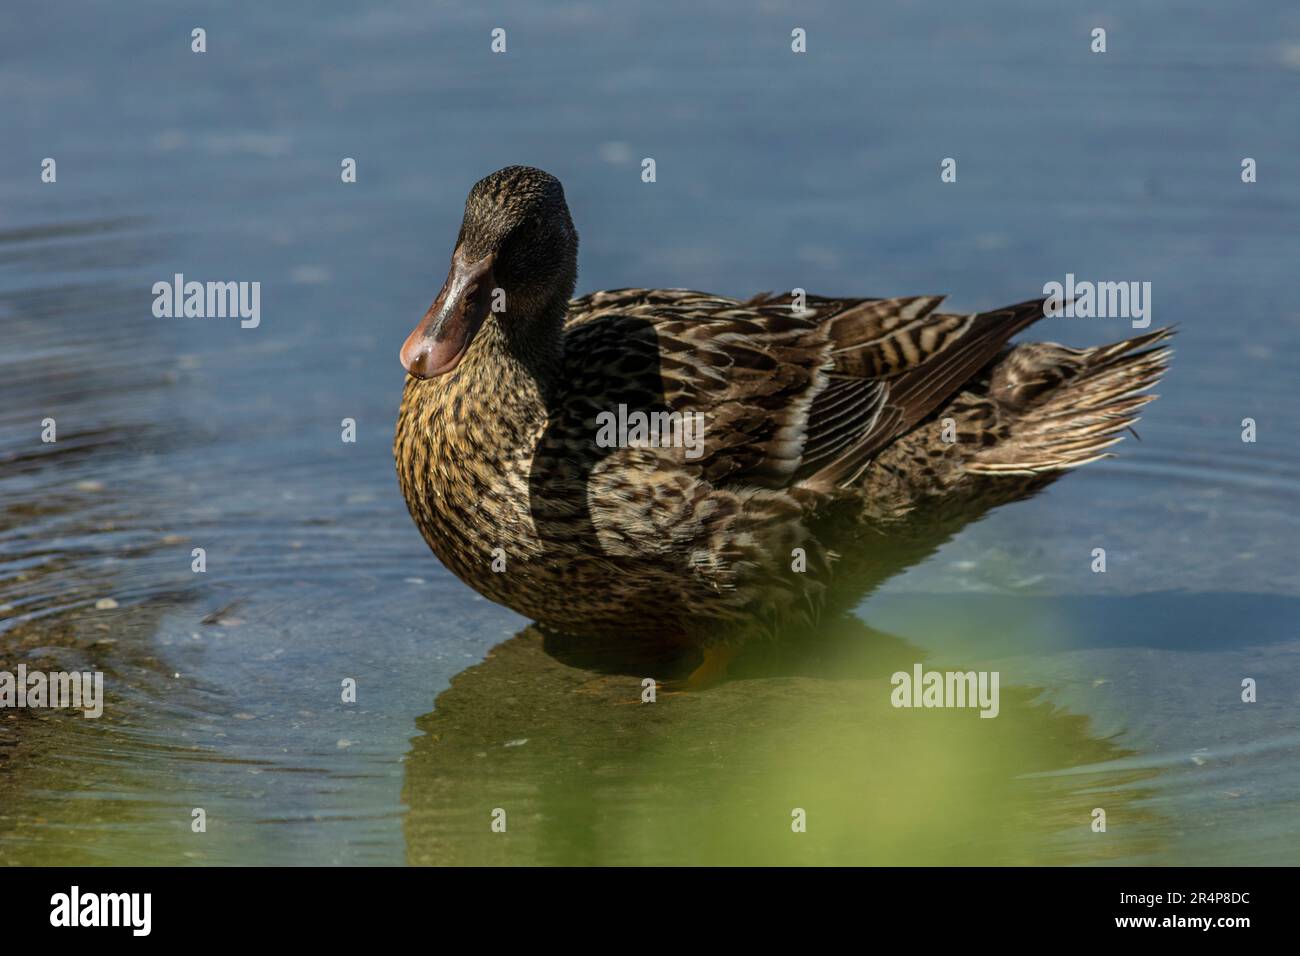 The mallard or wild duck (Anas platyrhynchos) is a dabbling duck that breeds throughout the temperate and subtropical Americas, Eurasia, and North Afr Stock Photo